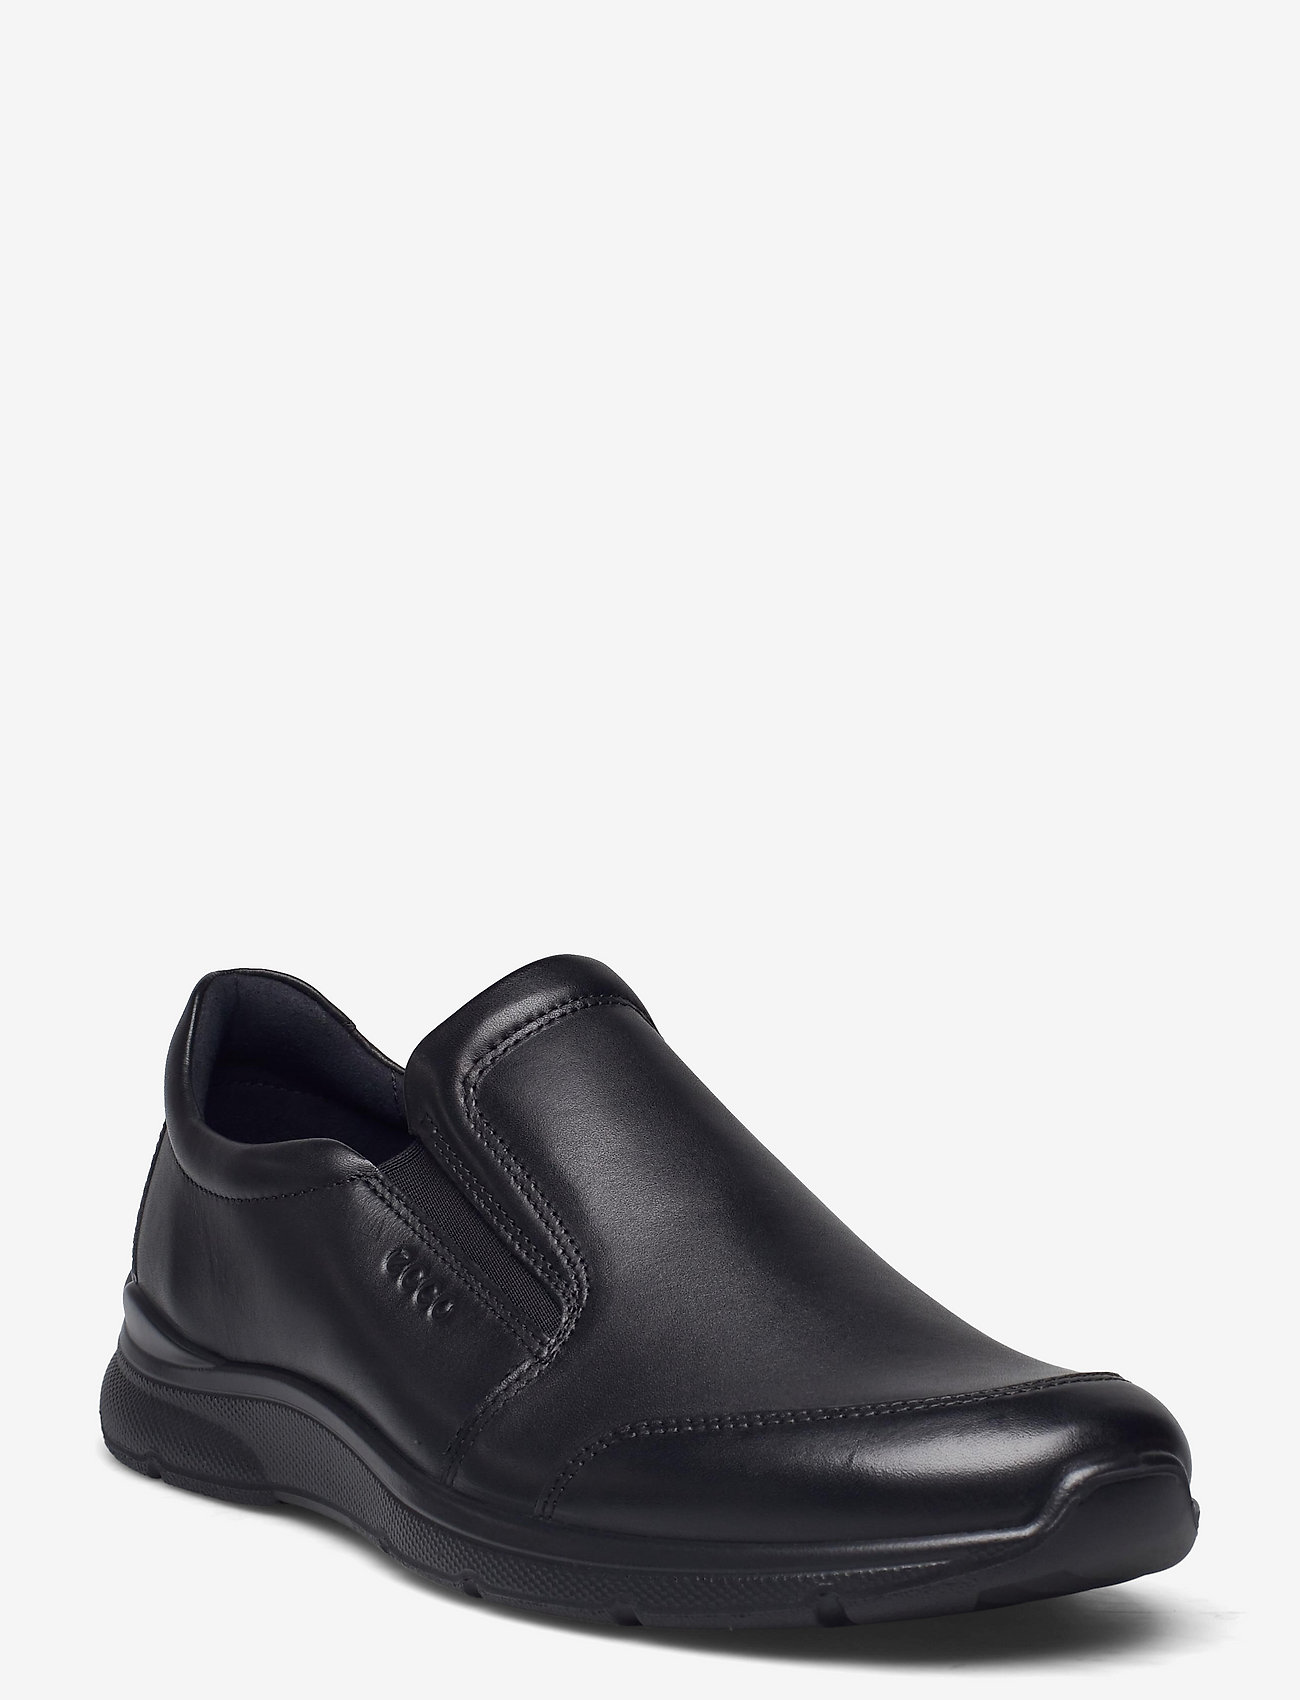 ECCO Irving - Loafers | Boozt.com